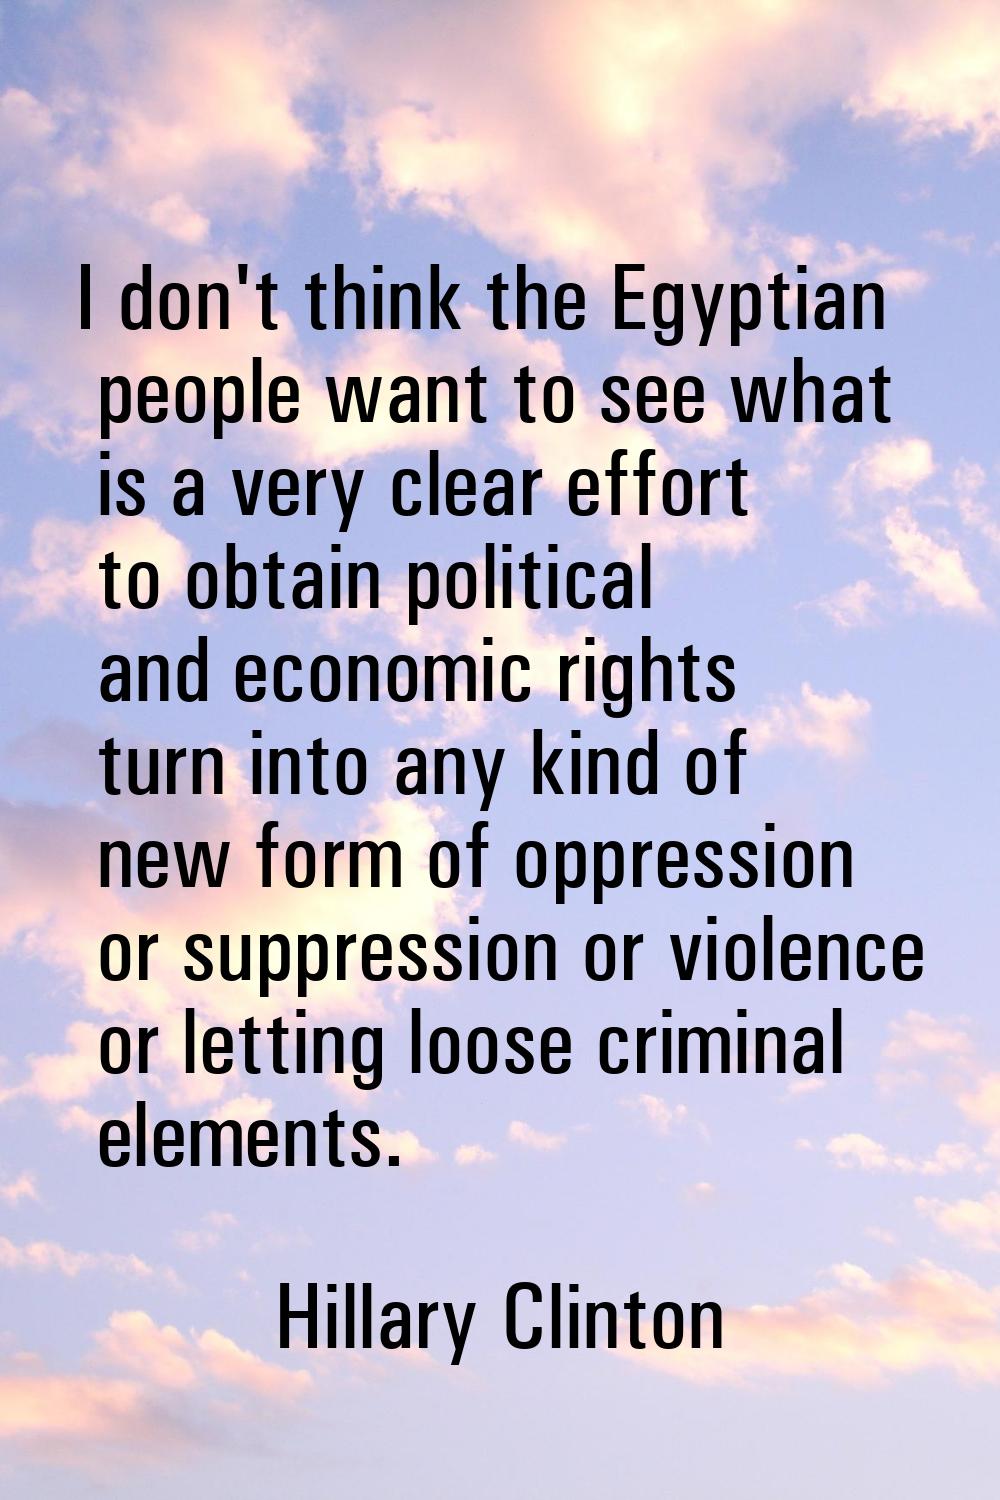 I don't think the Egyptian people want to see what is a very clear effort to obtain political and e